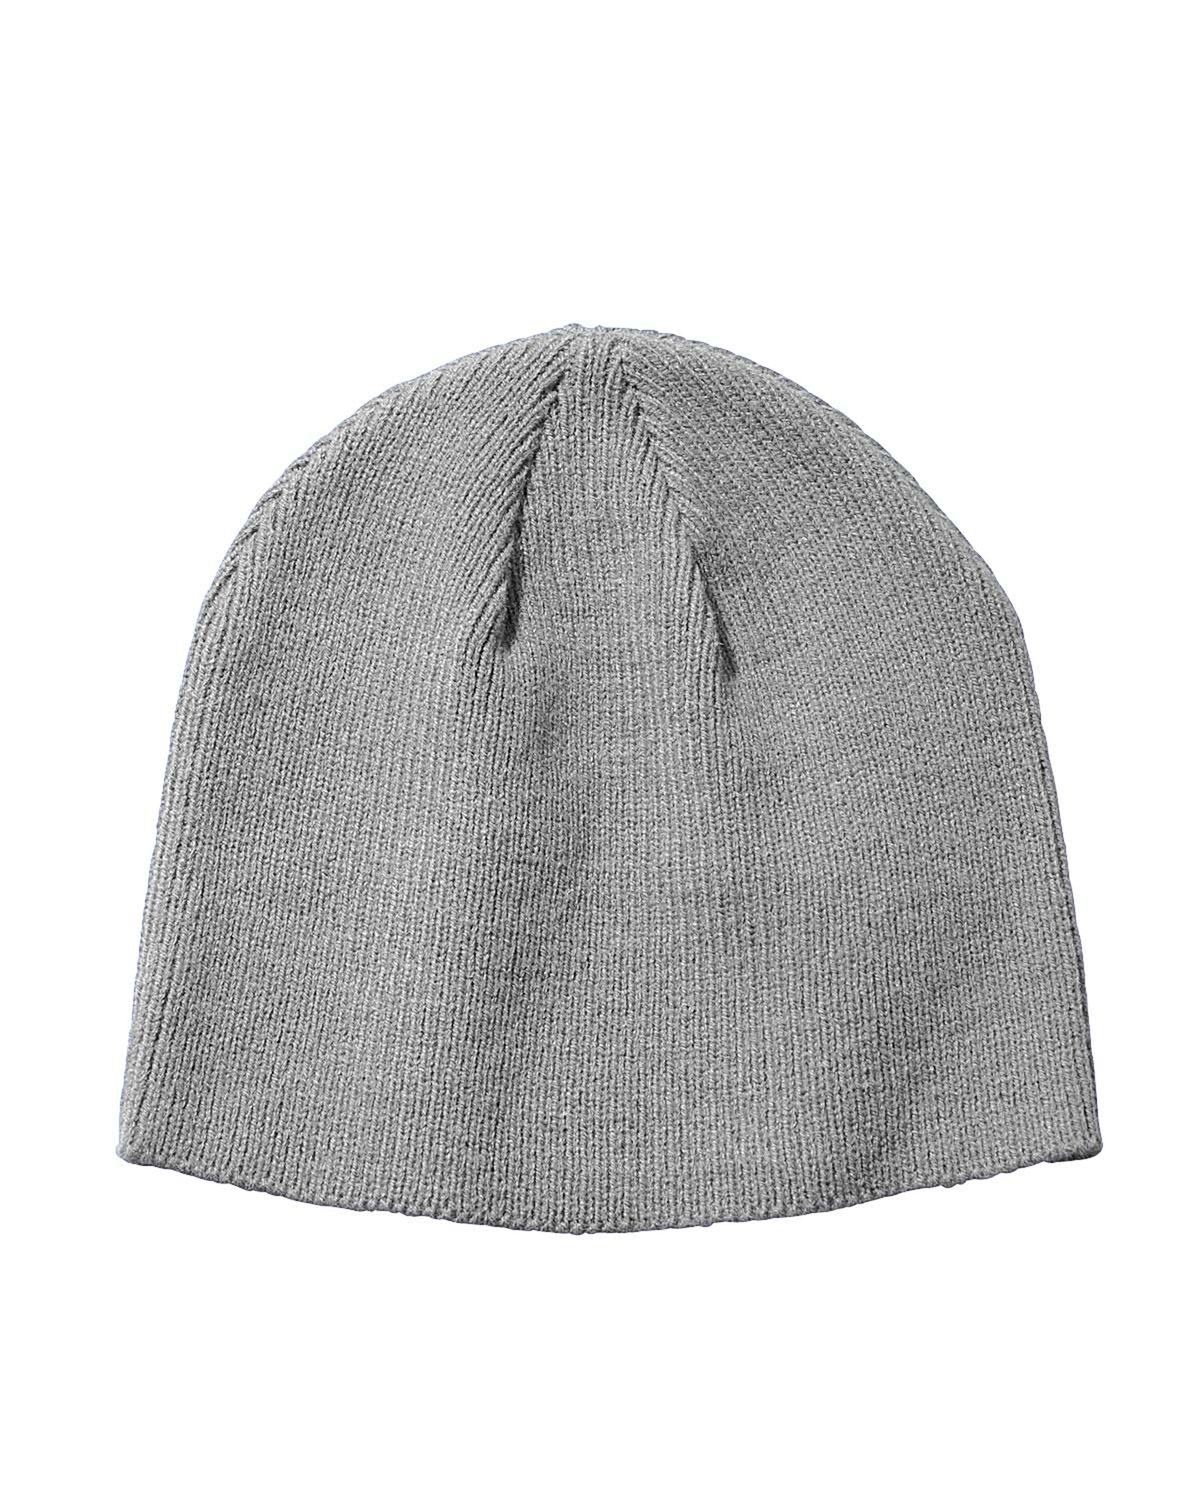 Front view of Knit Beanie